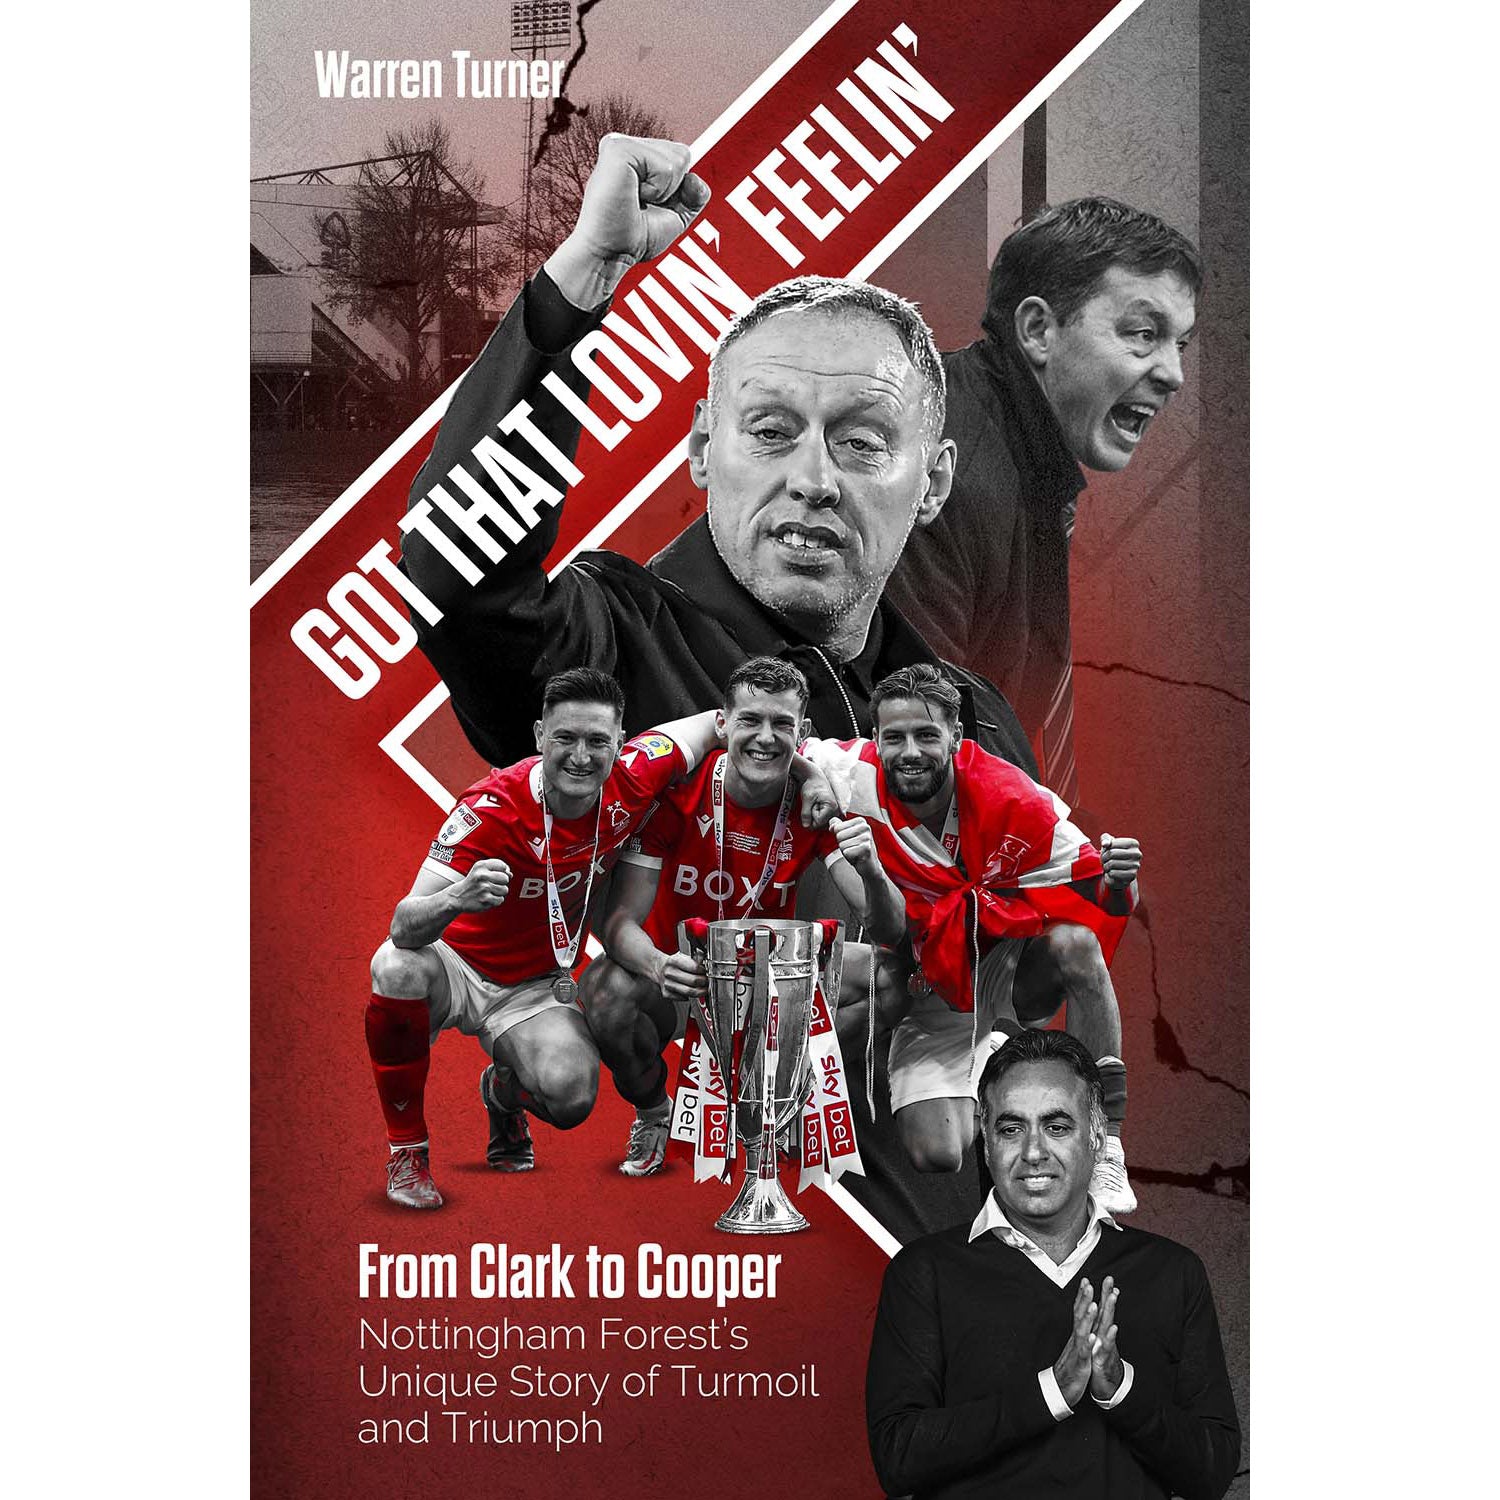 Got That Lovin' Feelin' – From Clark to Cooper – Nottingham Forest's Unique Story of Turmoil and Triumph